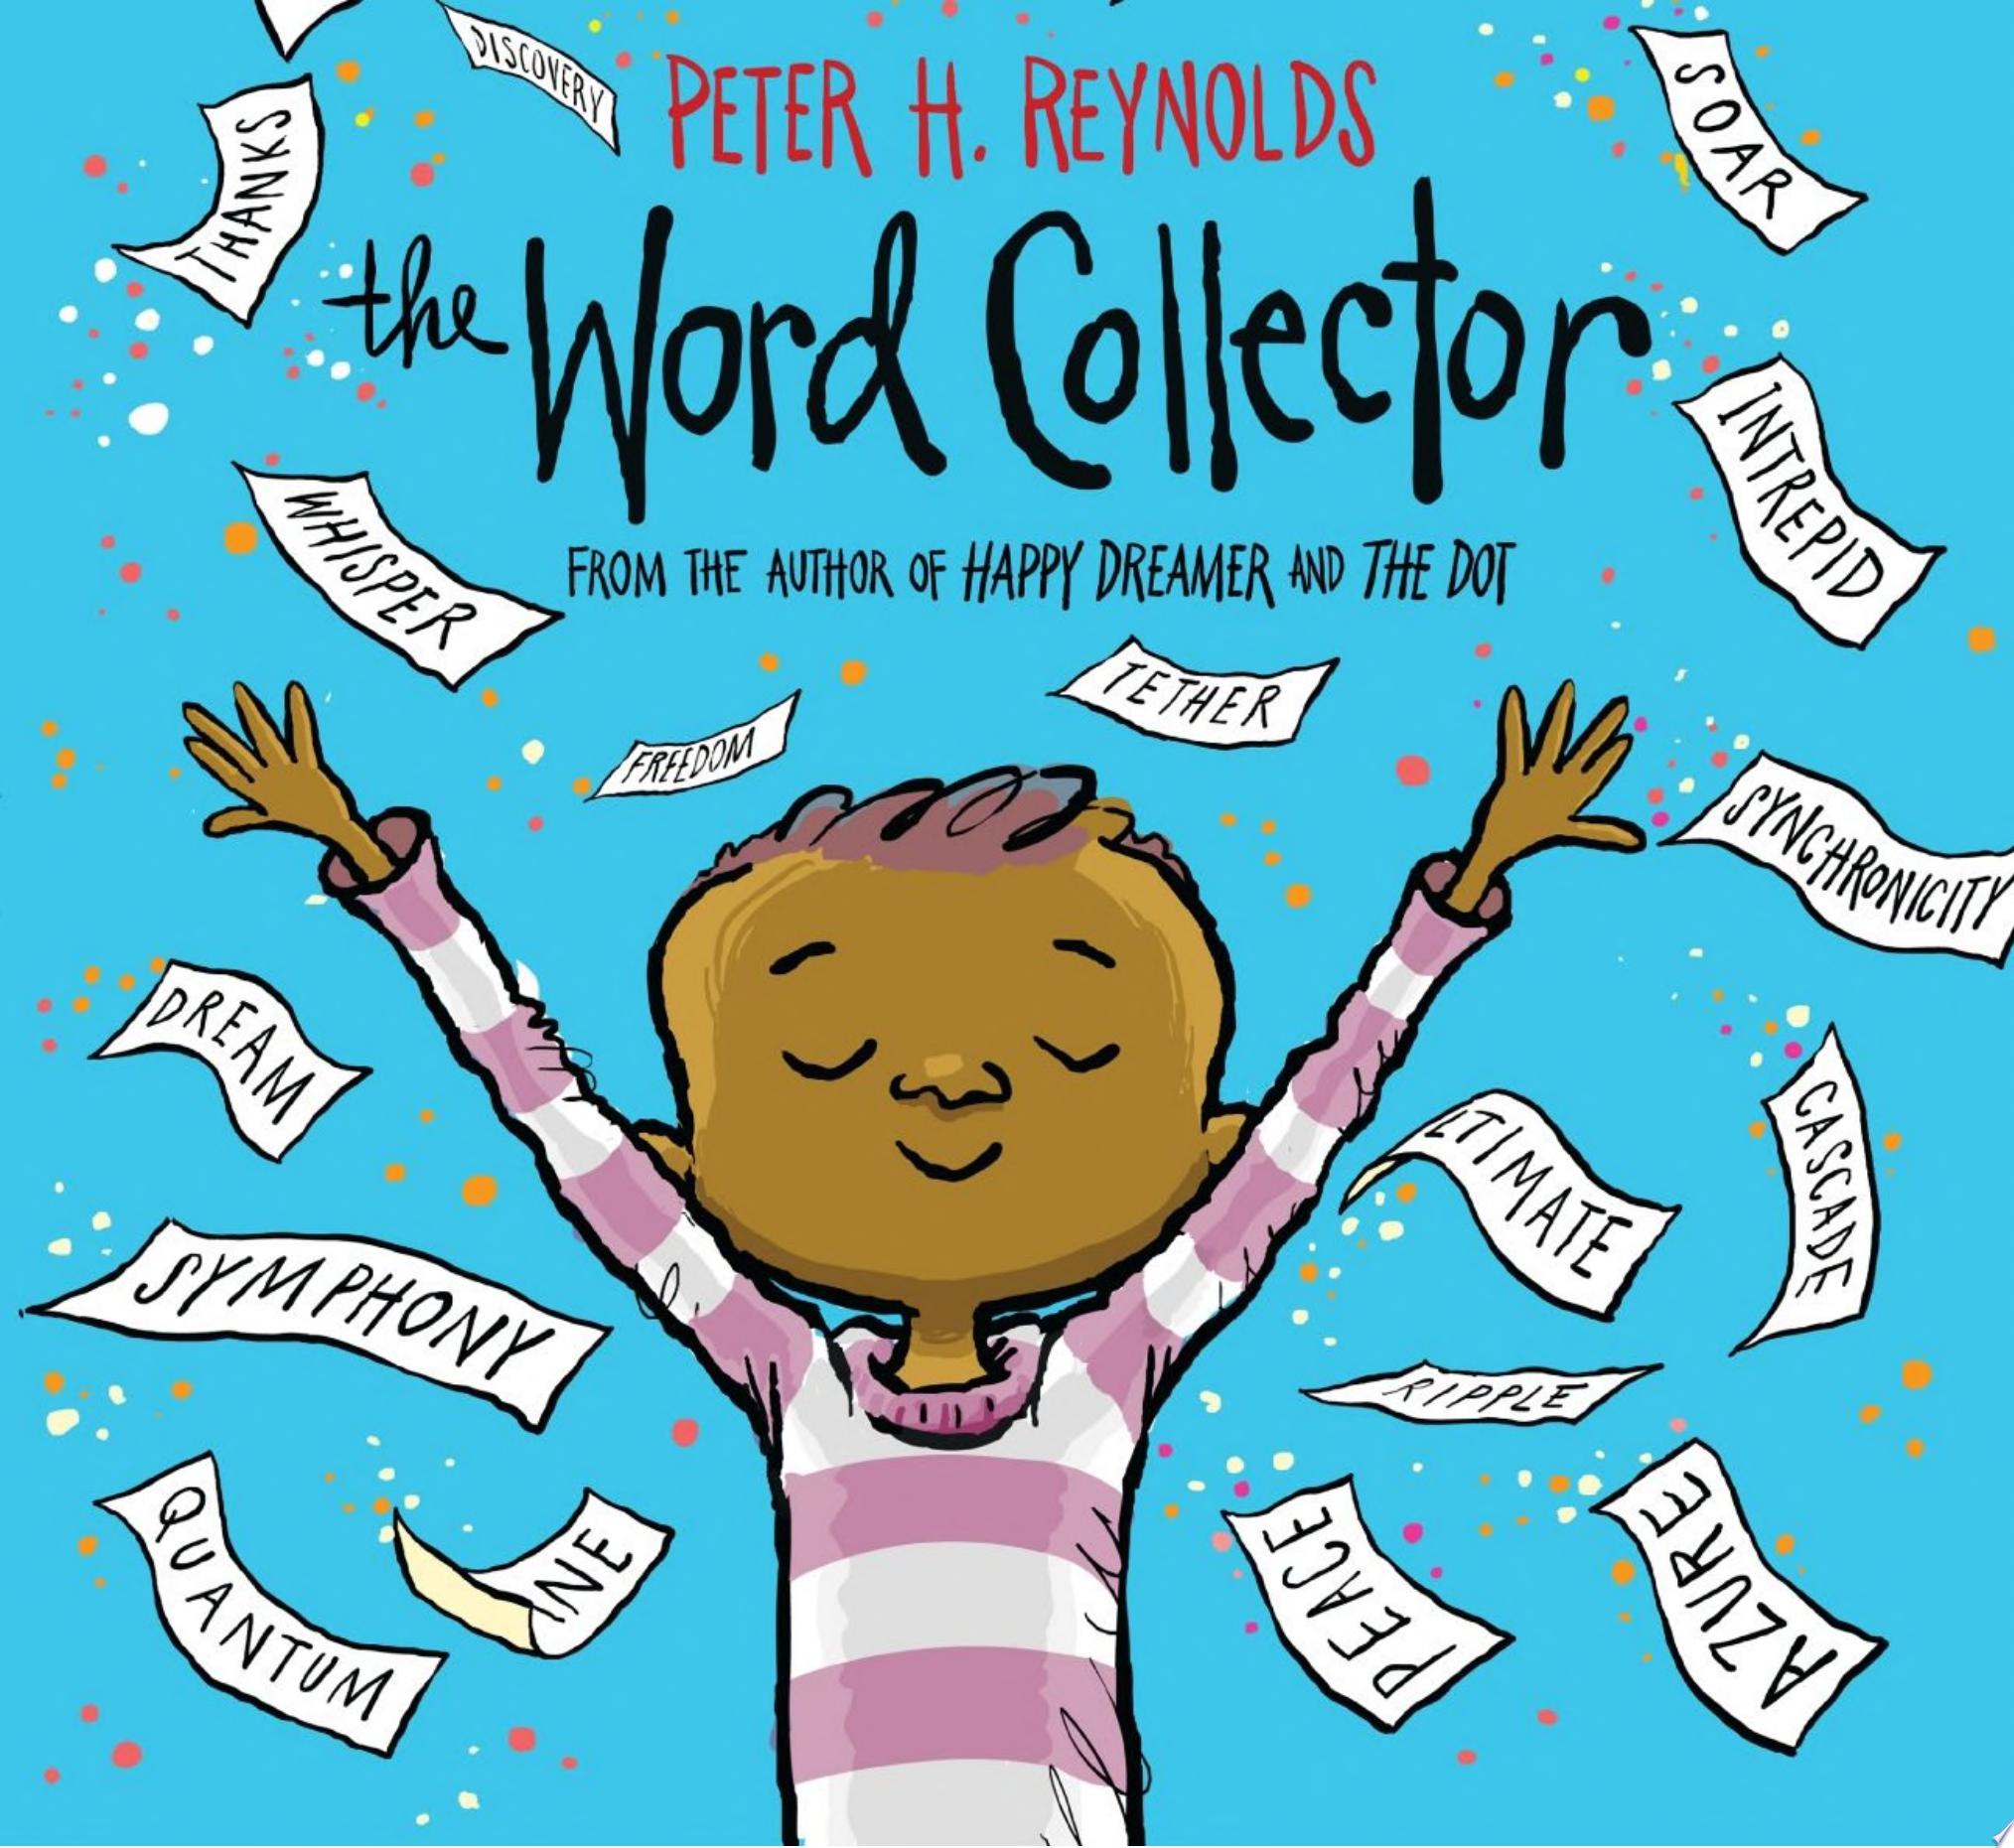 Image for "The Word Collector"